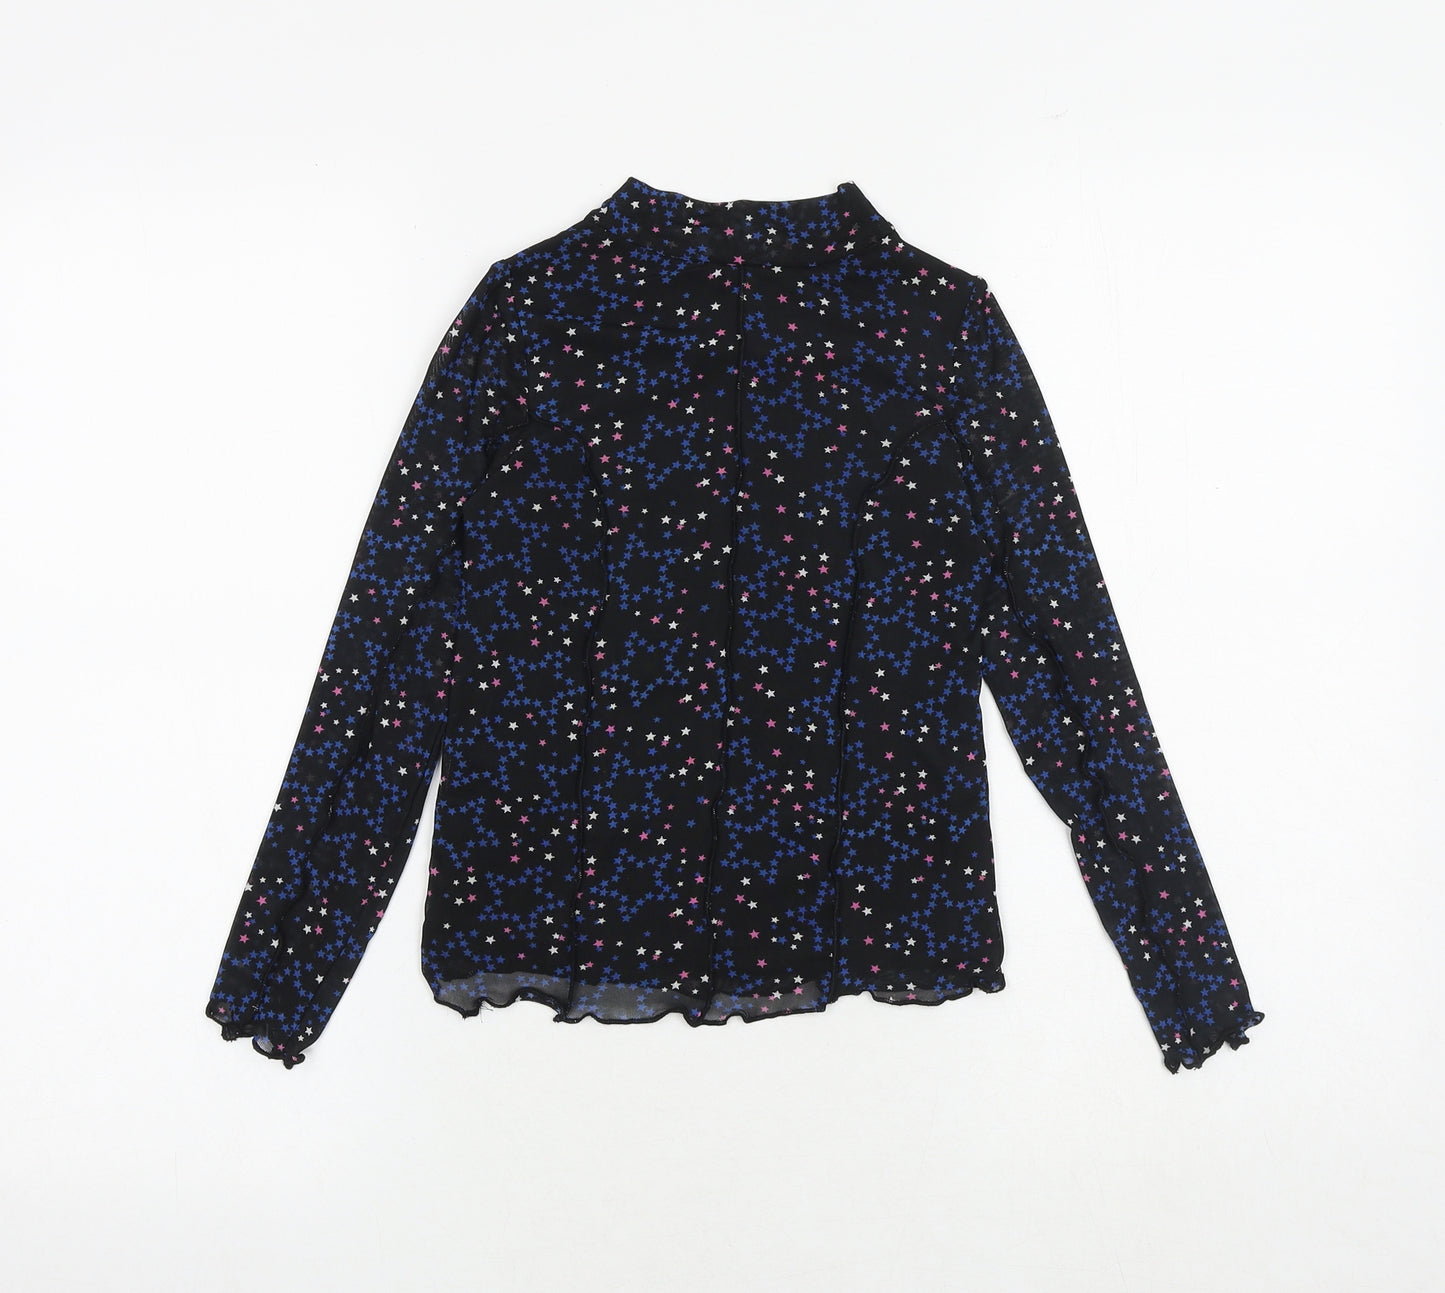 Marks and Spencer Girls Black Geometric Polyester Basic Blouse Size 7-8 Years Mock Neck Pullover - Star Print